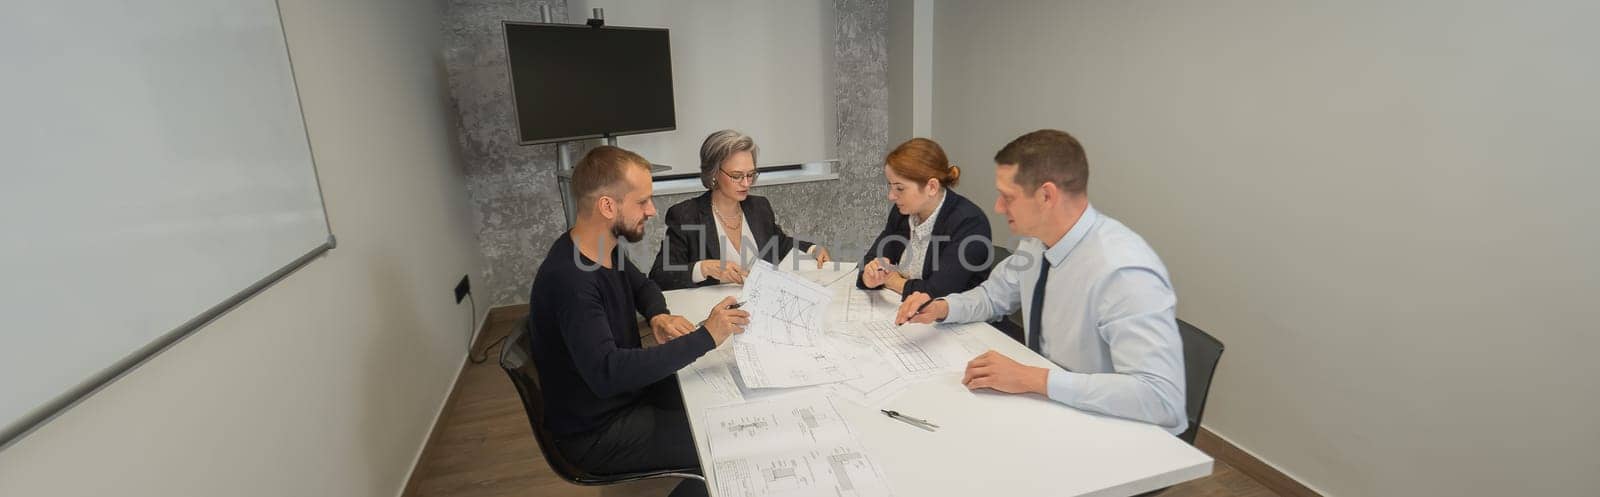 Four business people sitting around a table discussing blueprints. Designers engineers at a meeting. Widescreen